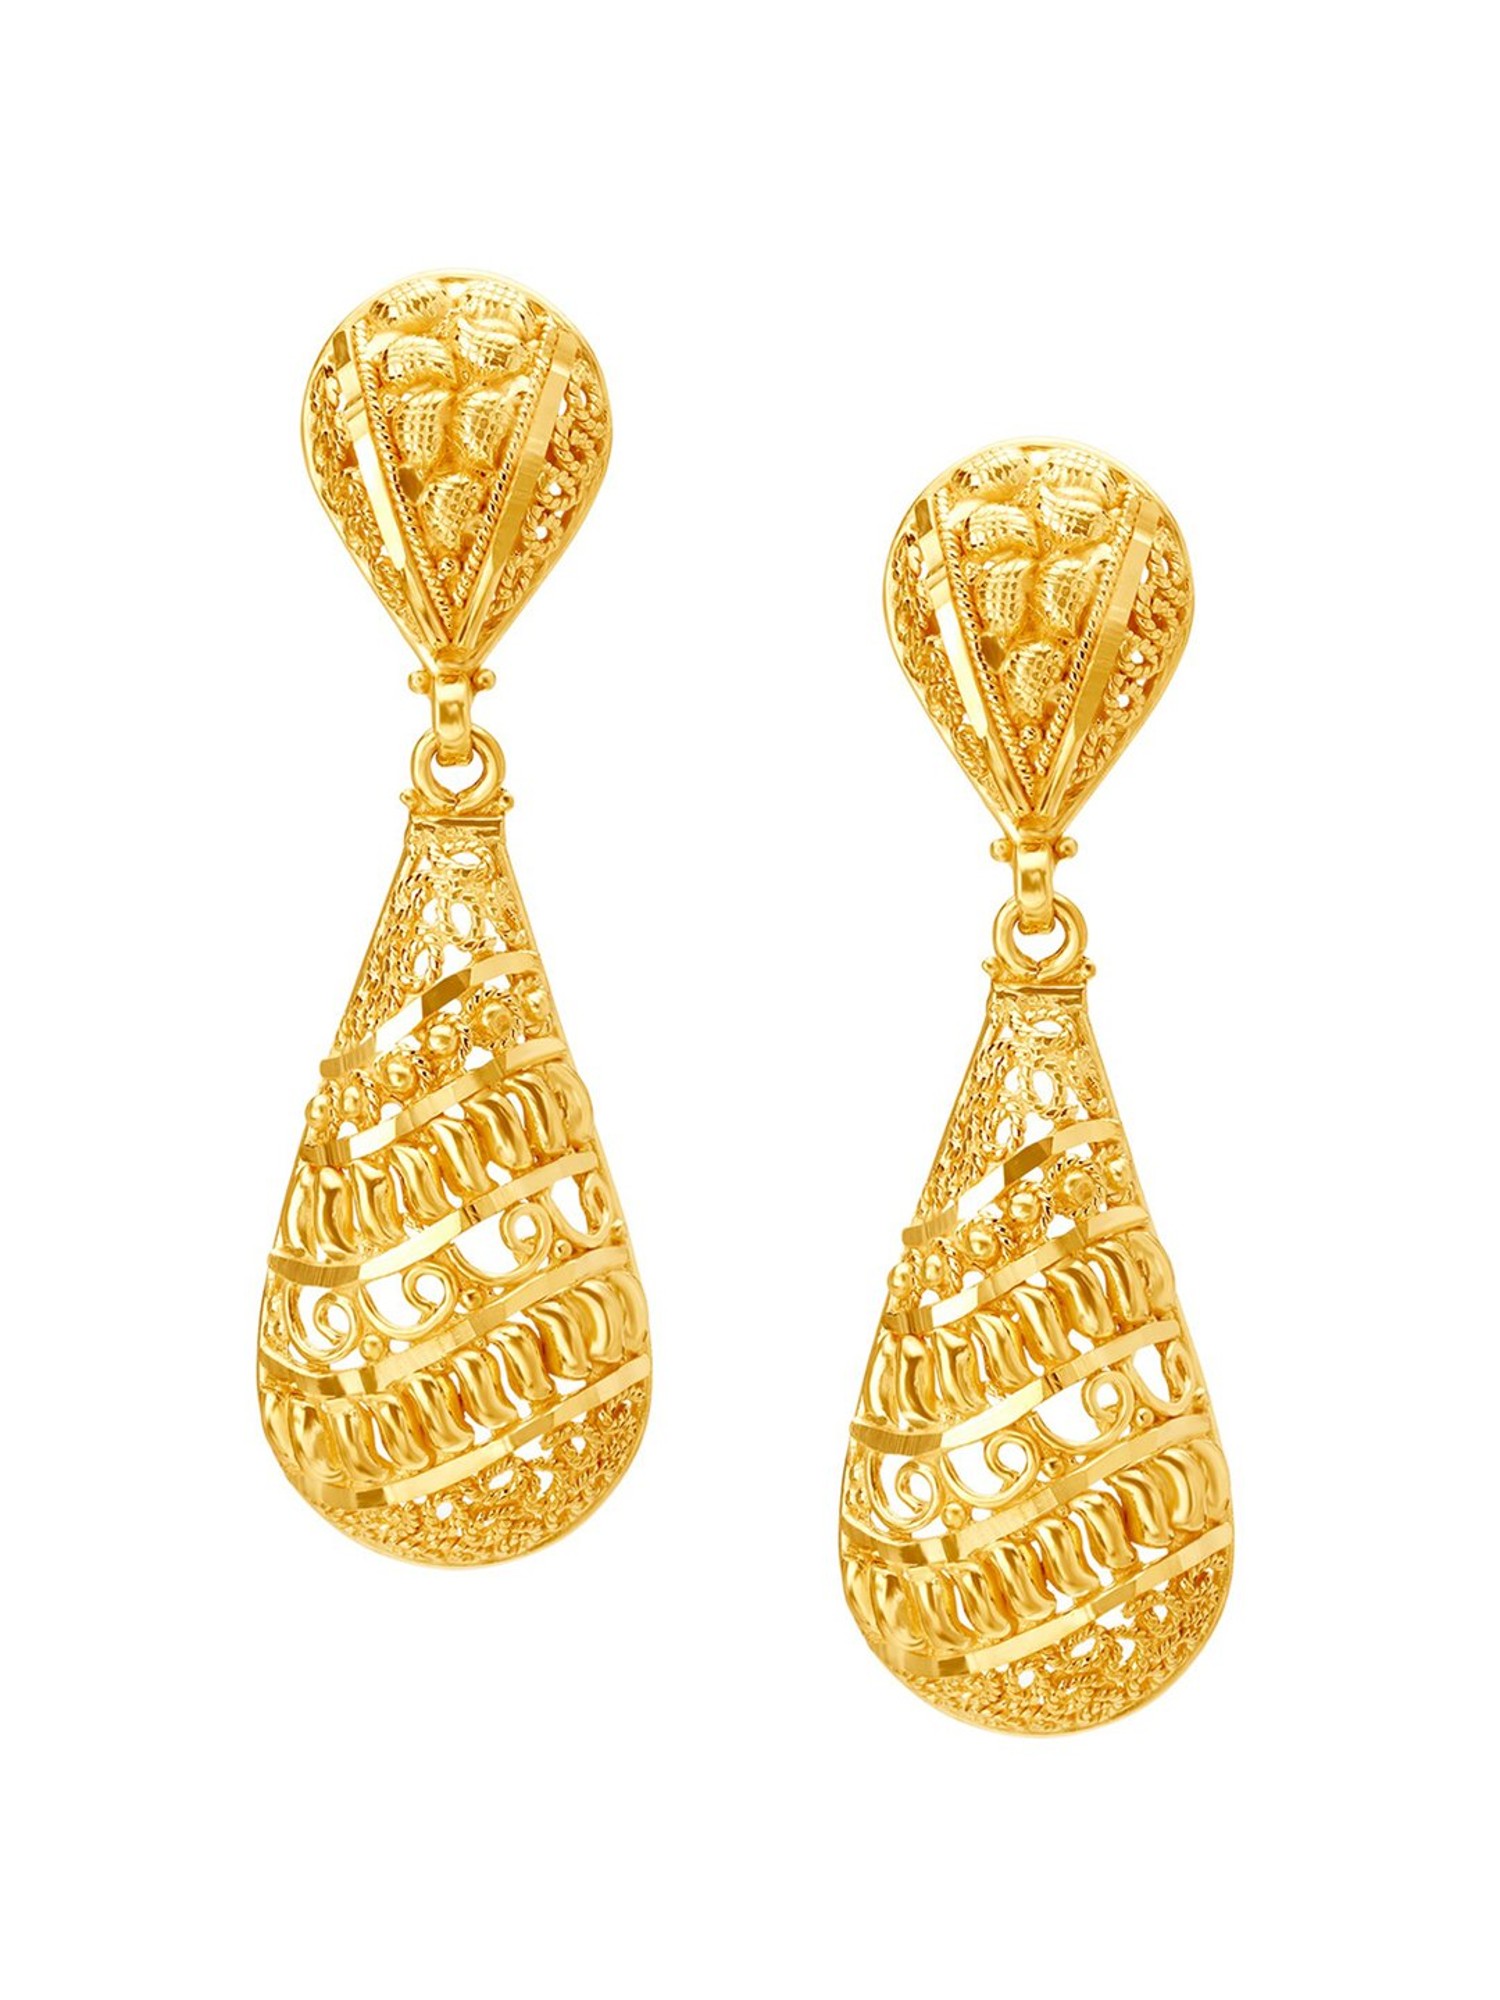 Buy Gold Earrings Online in Latest Designs at Best Prices | Buy 22KT Gold  Earrings at Tanishq | Online earrings, Earrings, Gold earrings designs